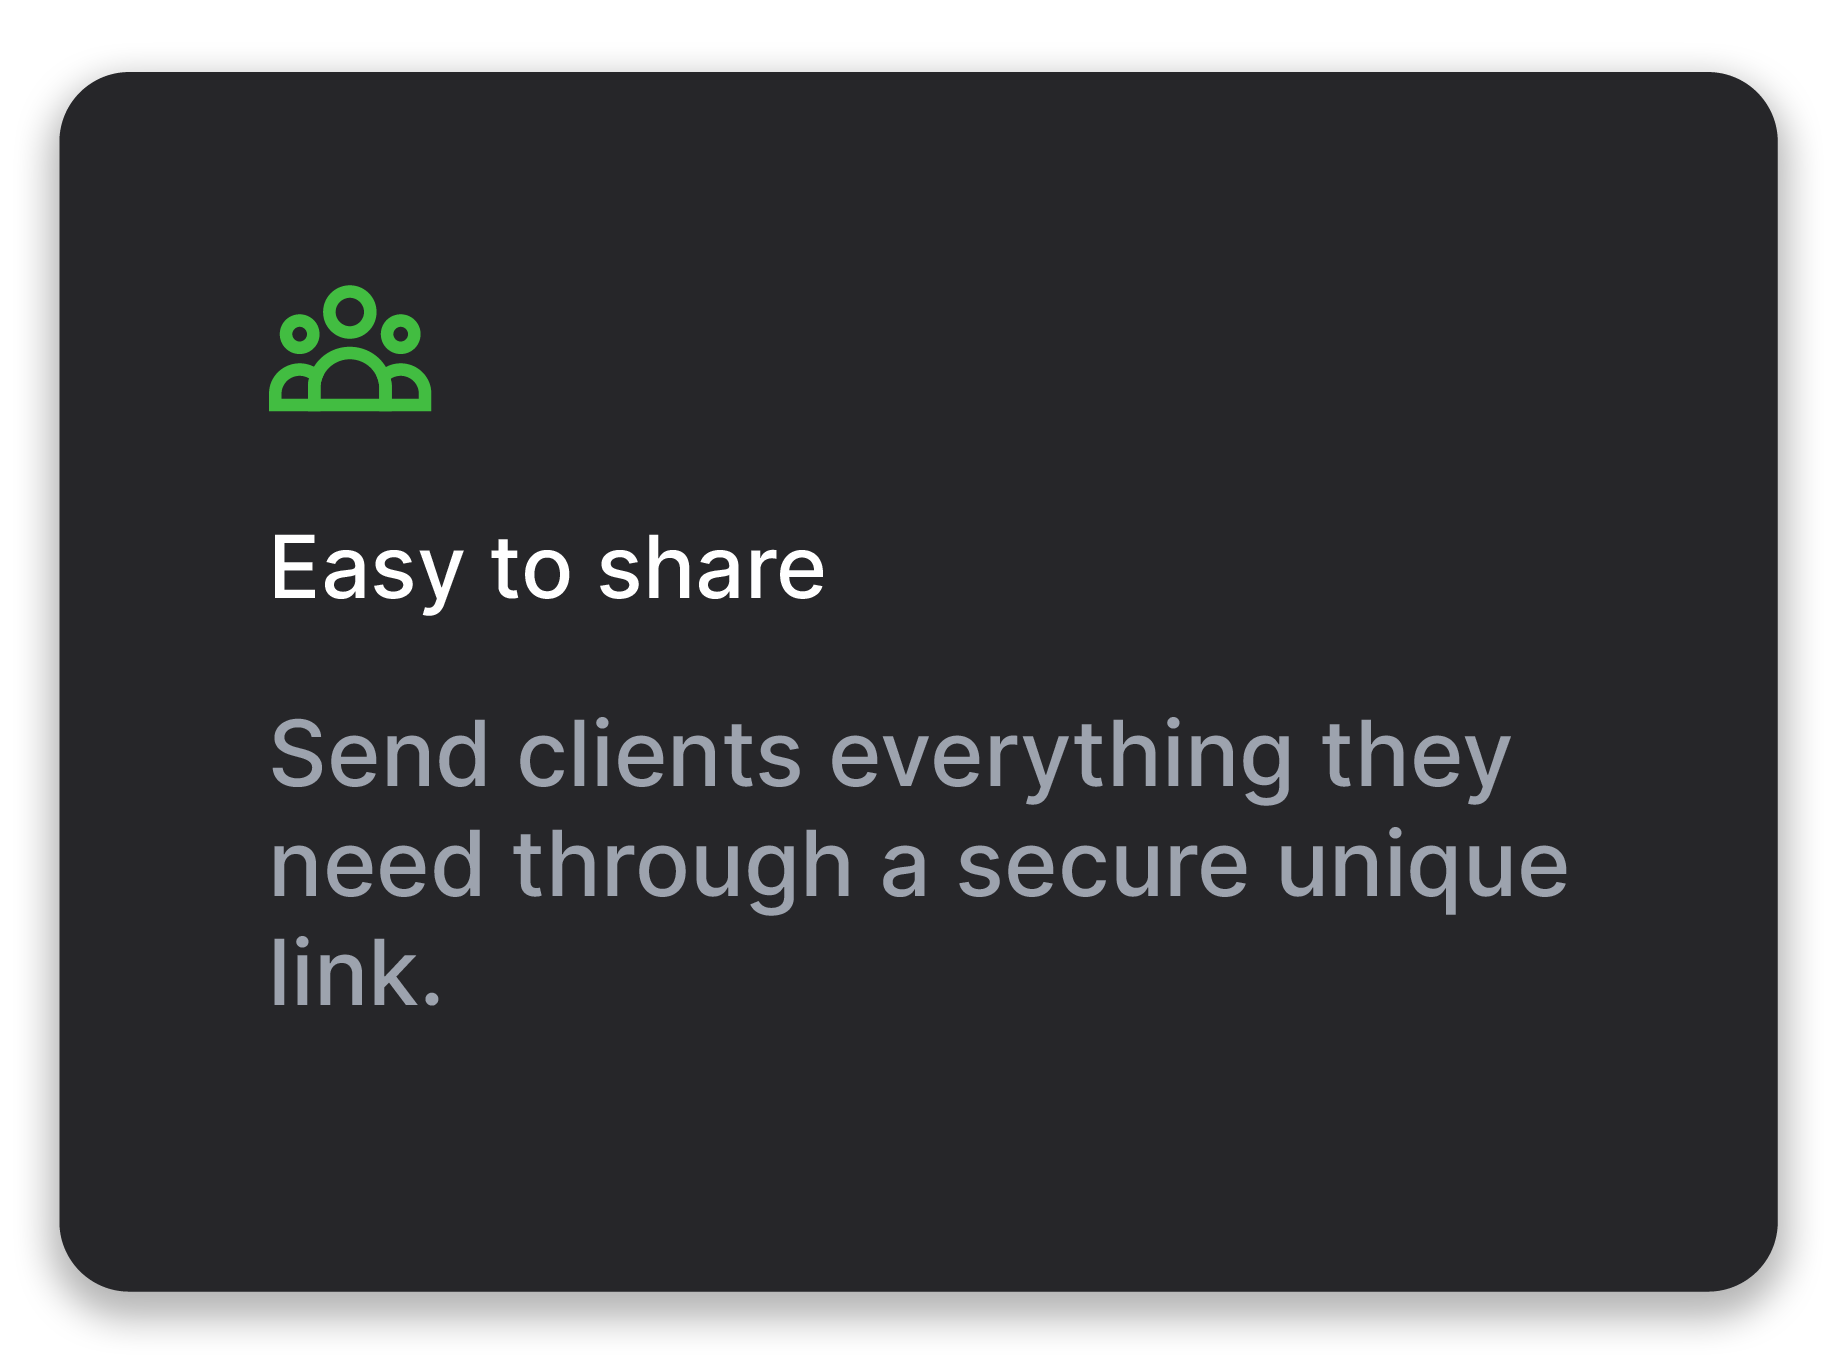 Easy to share - Send clients everything they need through a secure unique link.